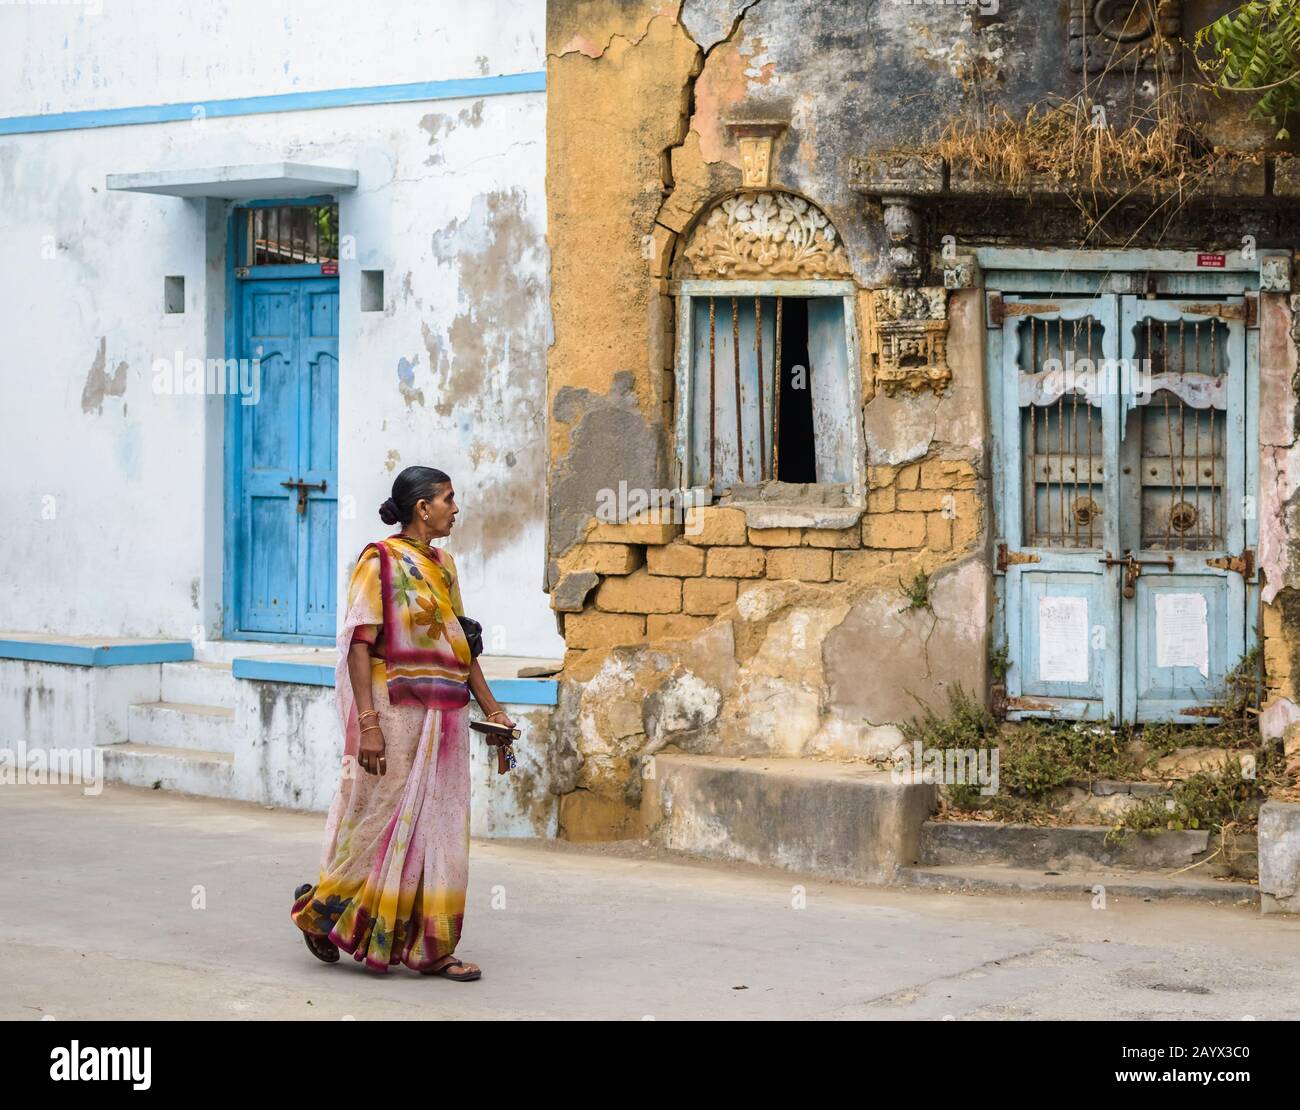 An old Indian woman wearing a colorful saree walks past old dilapidated houses on the streets of the island of Diu. Stock Photo